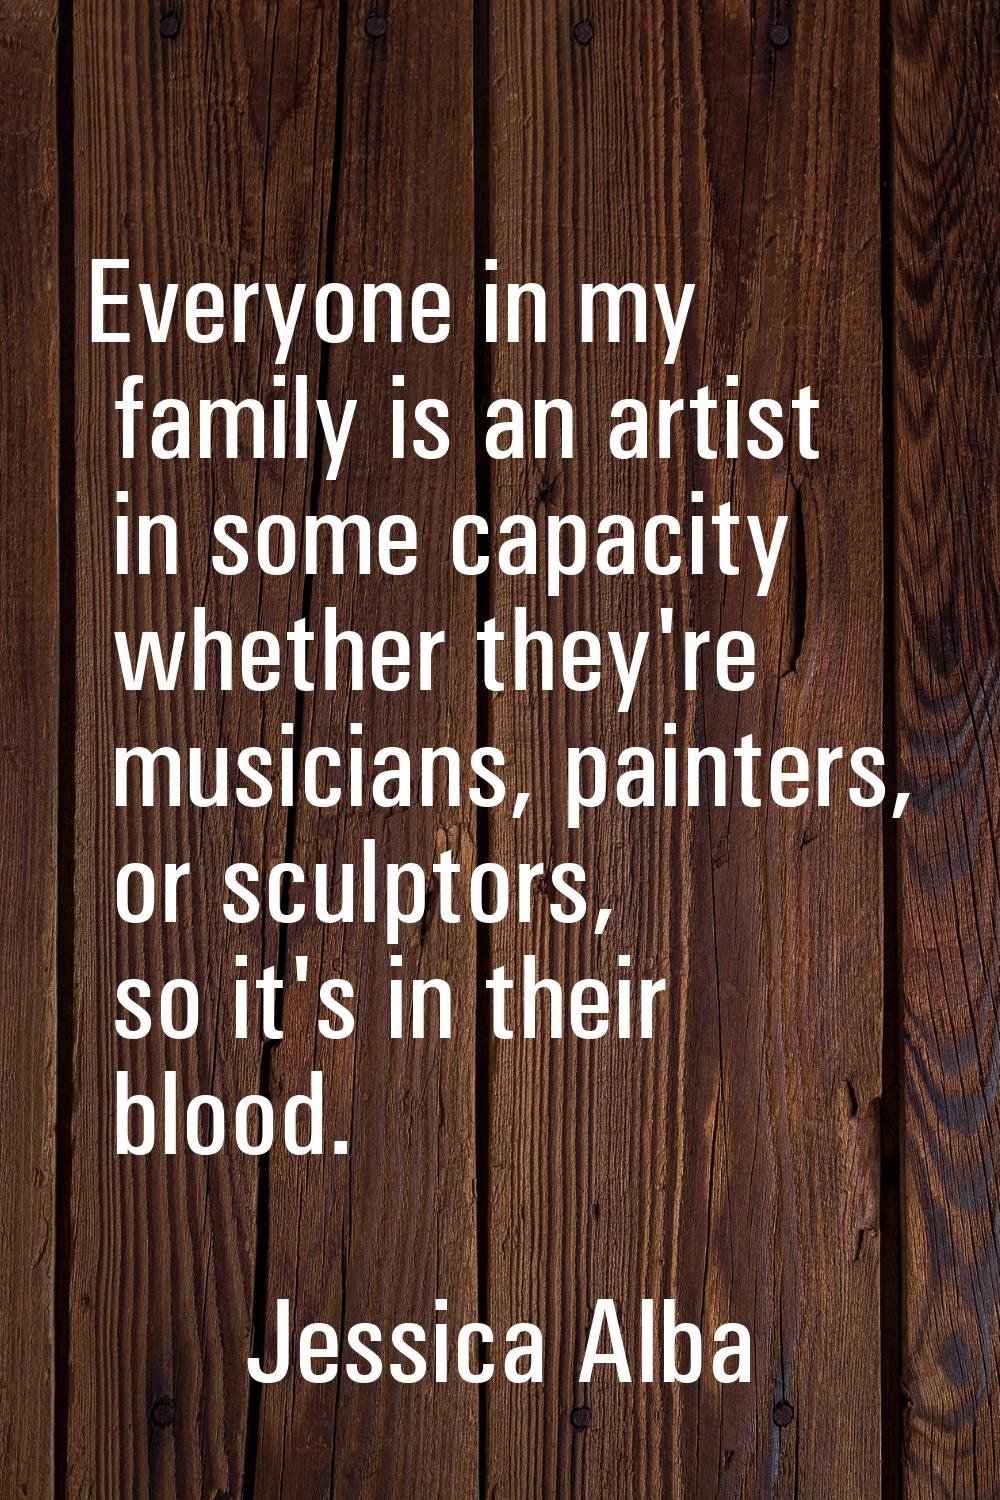 Everyone in my family is an artist in some capacity whether they're musicians, painters, or sculpto